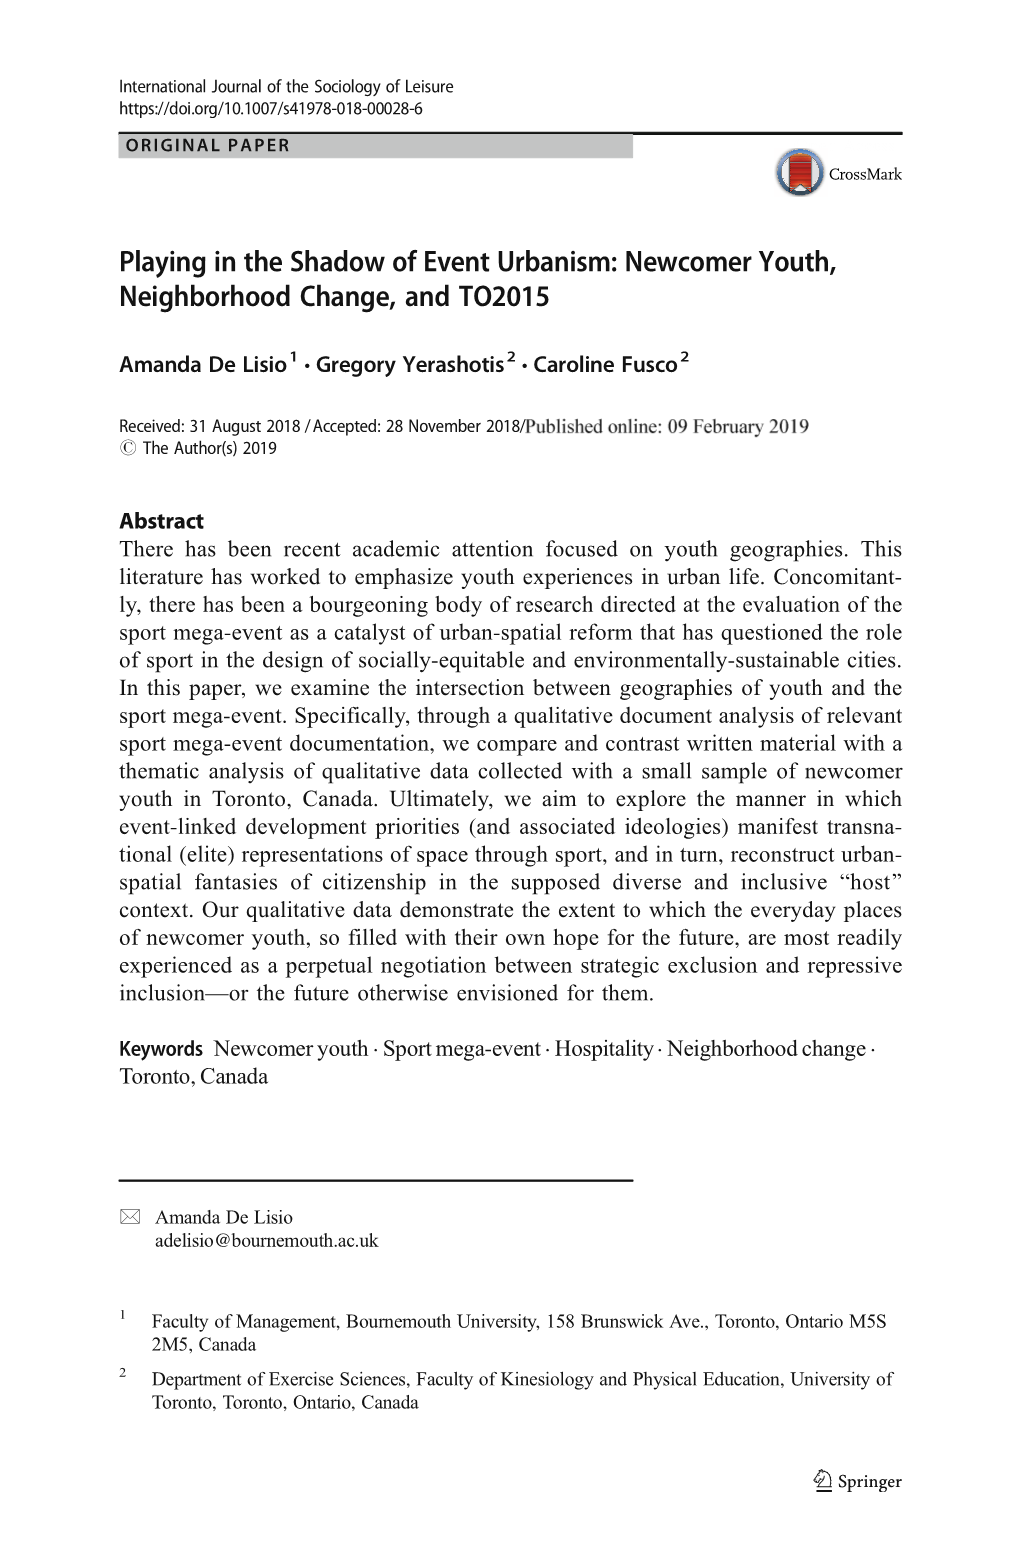 Playing in the Shadow of Event Urbanism: Newcomer Youth, Neighborhood Change, and TO2015